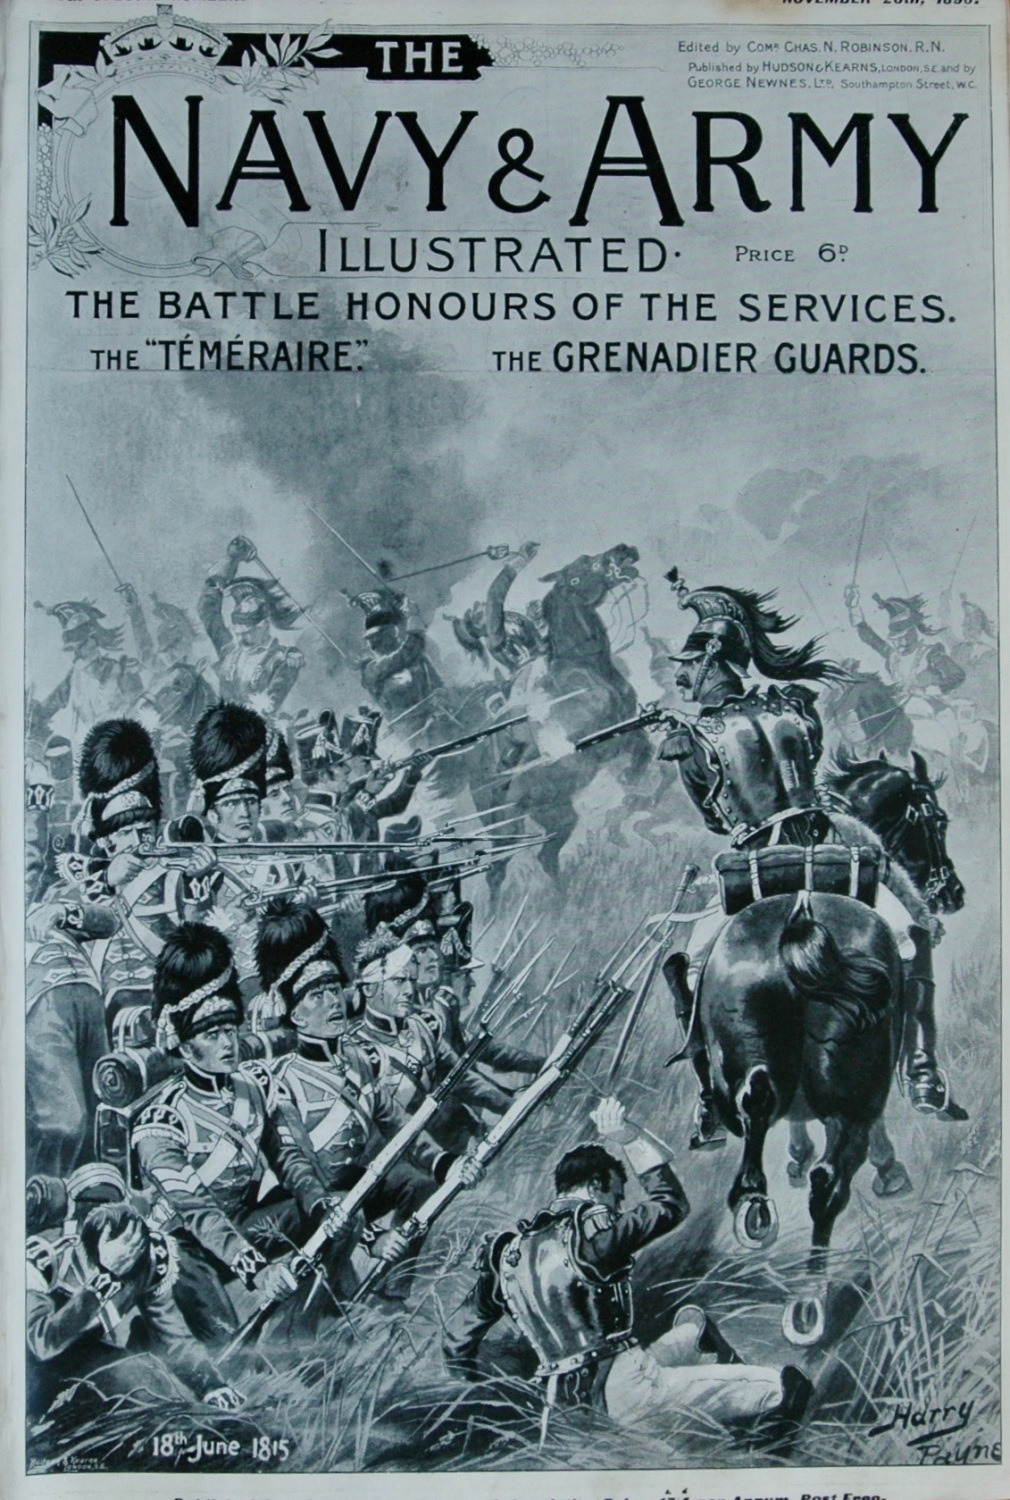 Original Full copy from Navy & Army Illustrated, 1896